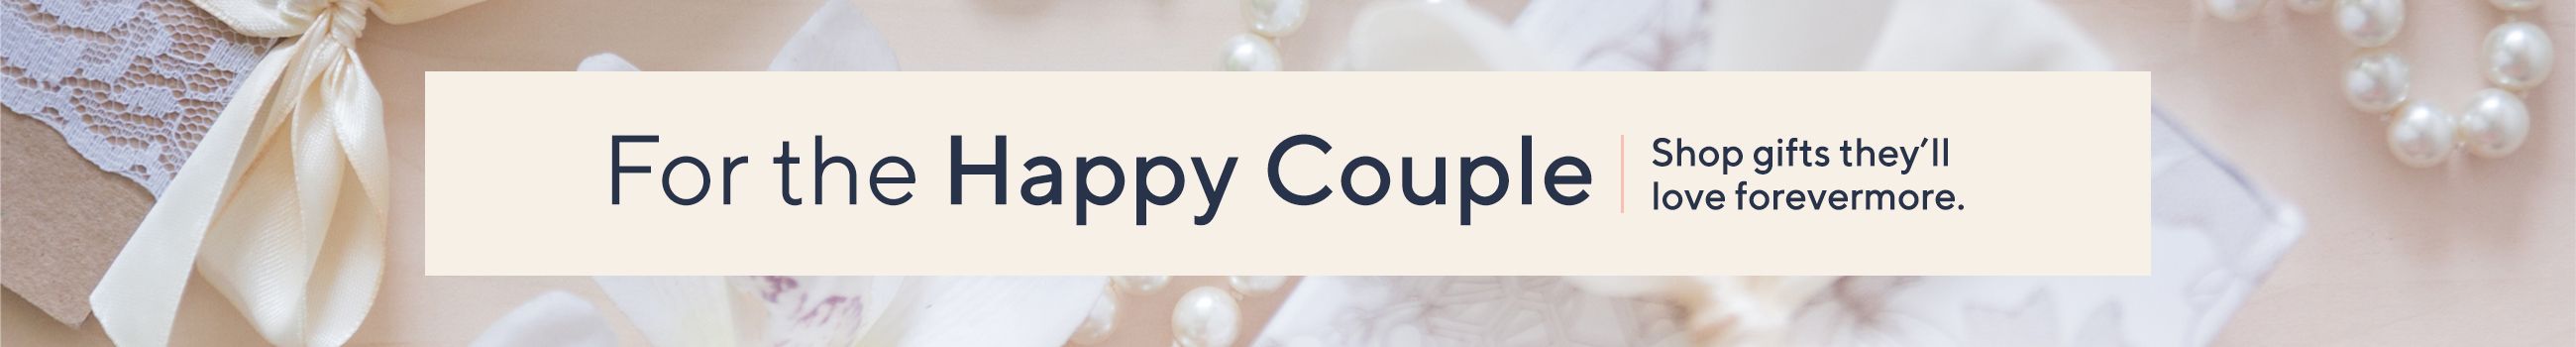 For the Happy Couple: Shop gifts they'll love forevermore. 